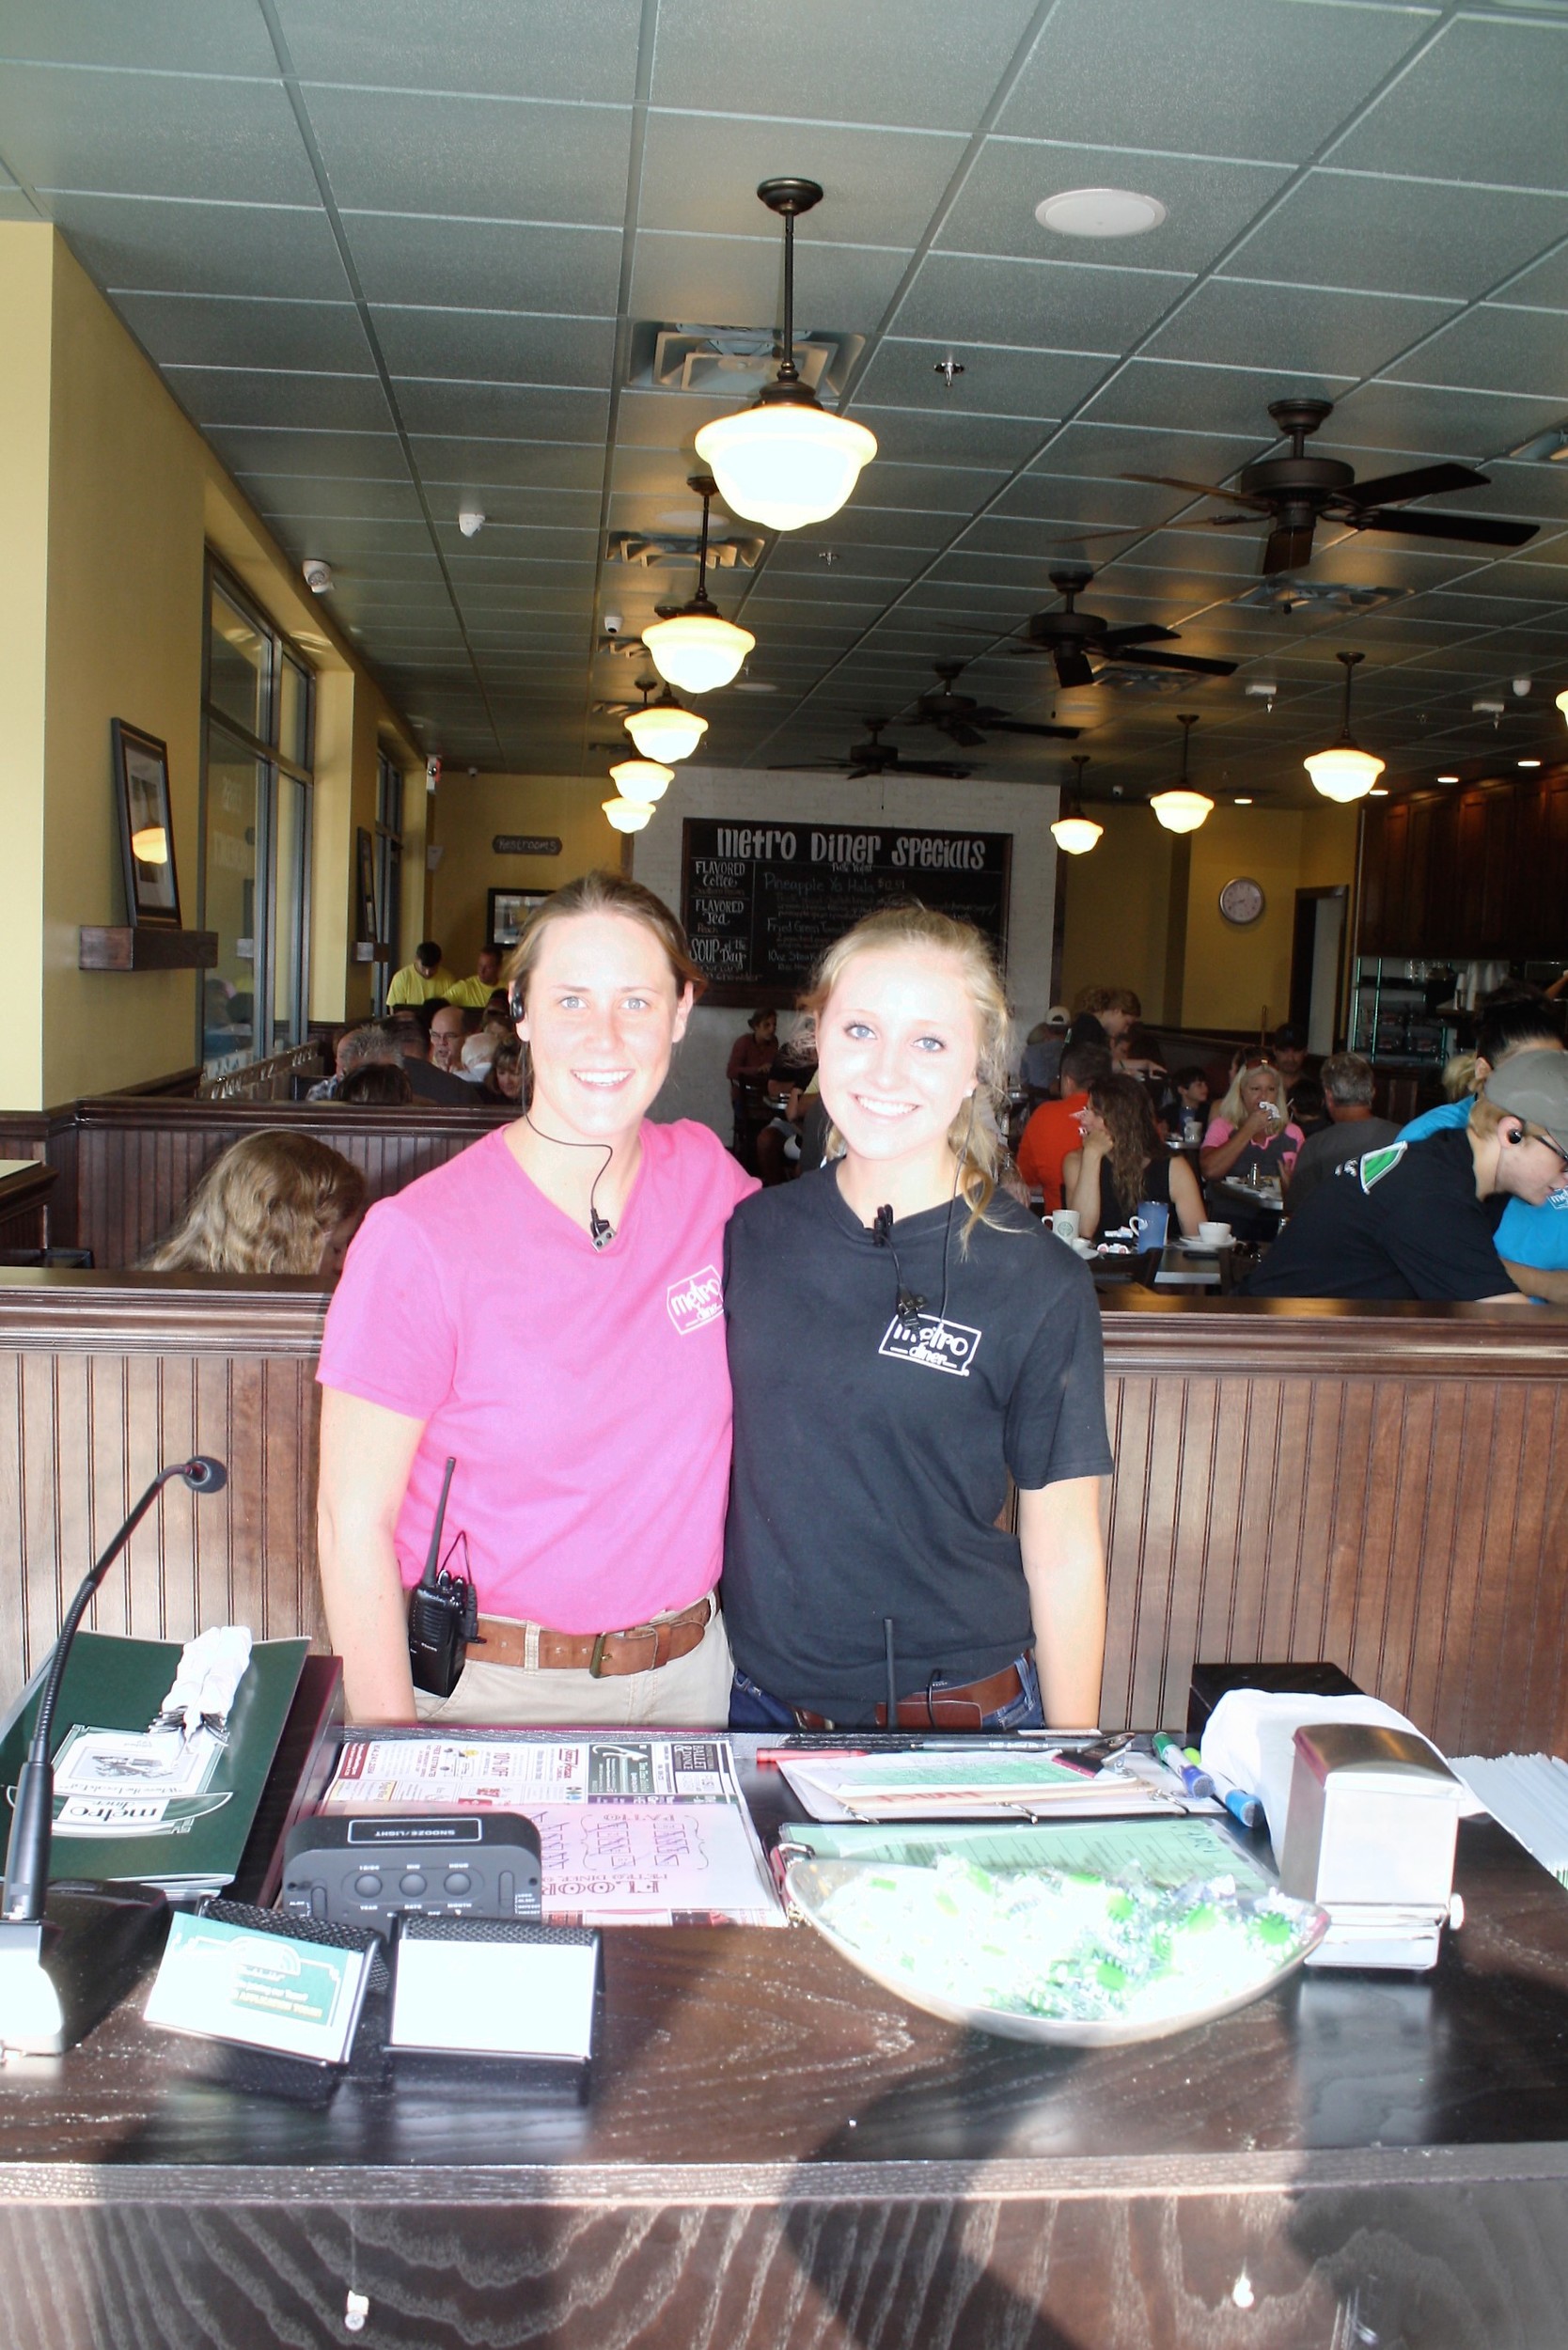 Hostesses Miranda Rasky and Ashton Putnal welcome guests to the Metro Diner.